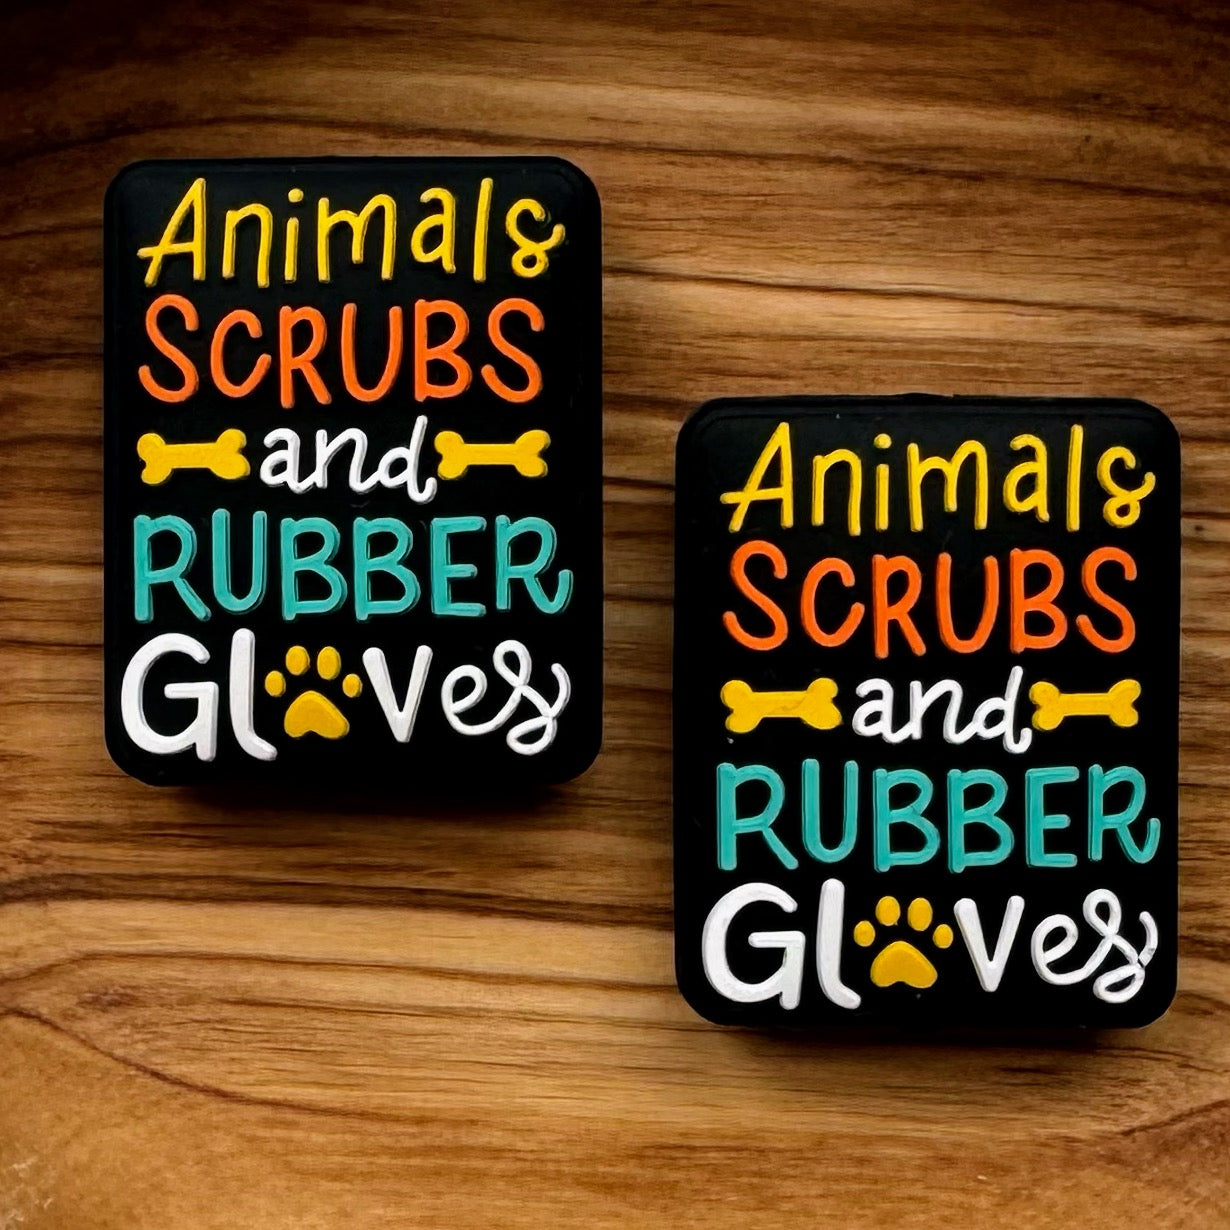 Animals, Scrubs, and Rubber Gloves Focal